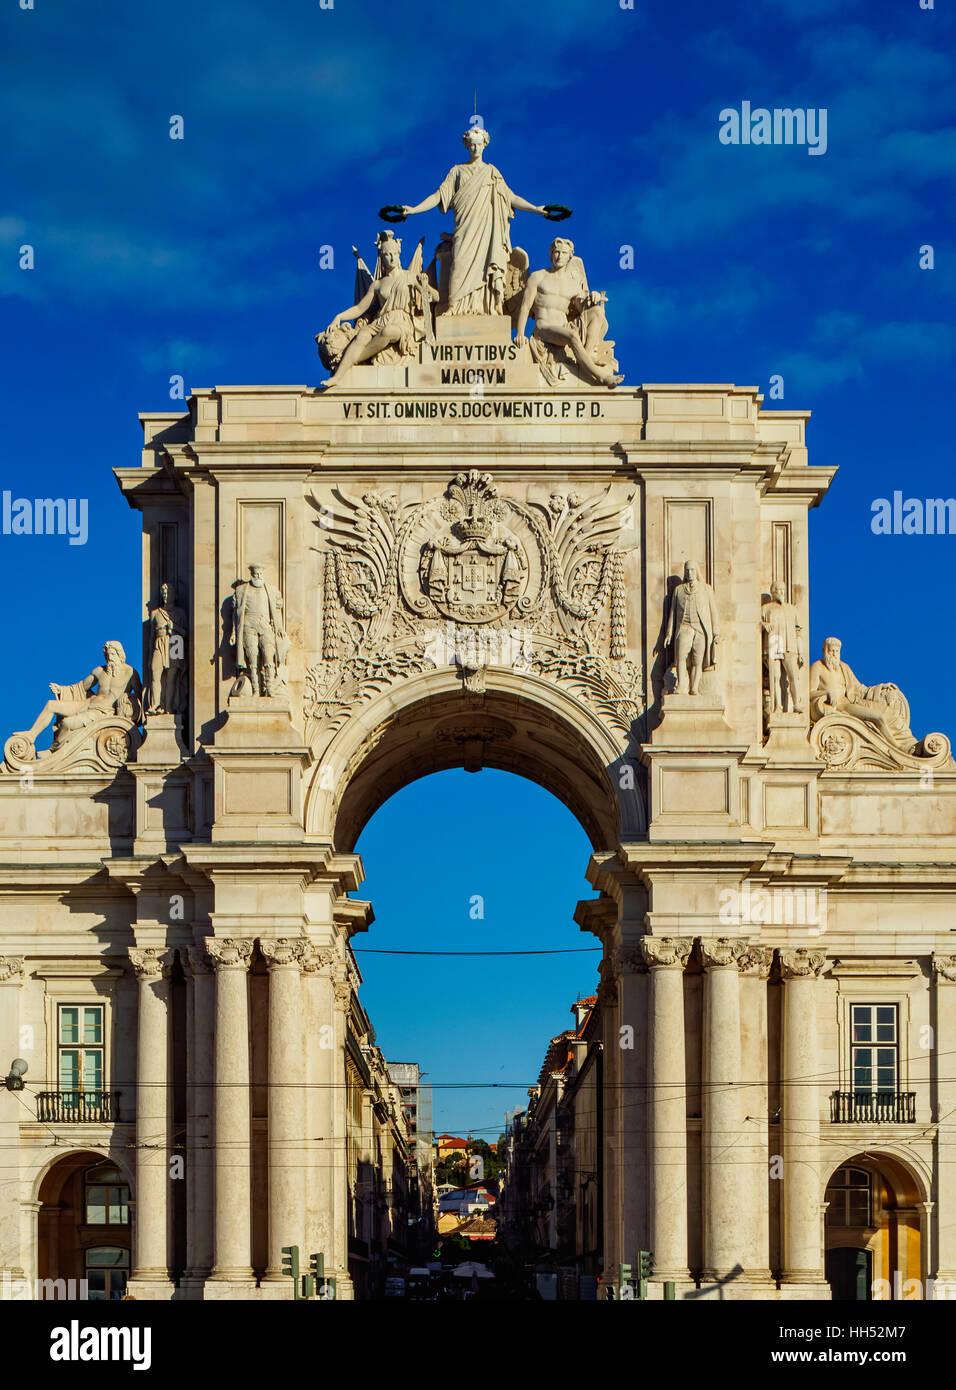 Portugal, Lisbon, Commerce Square, View of the Rua Augusta Arch. Stock Photo